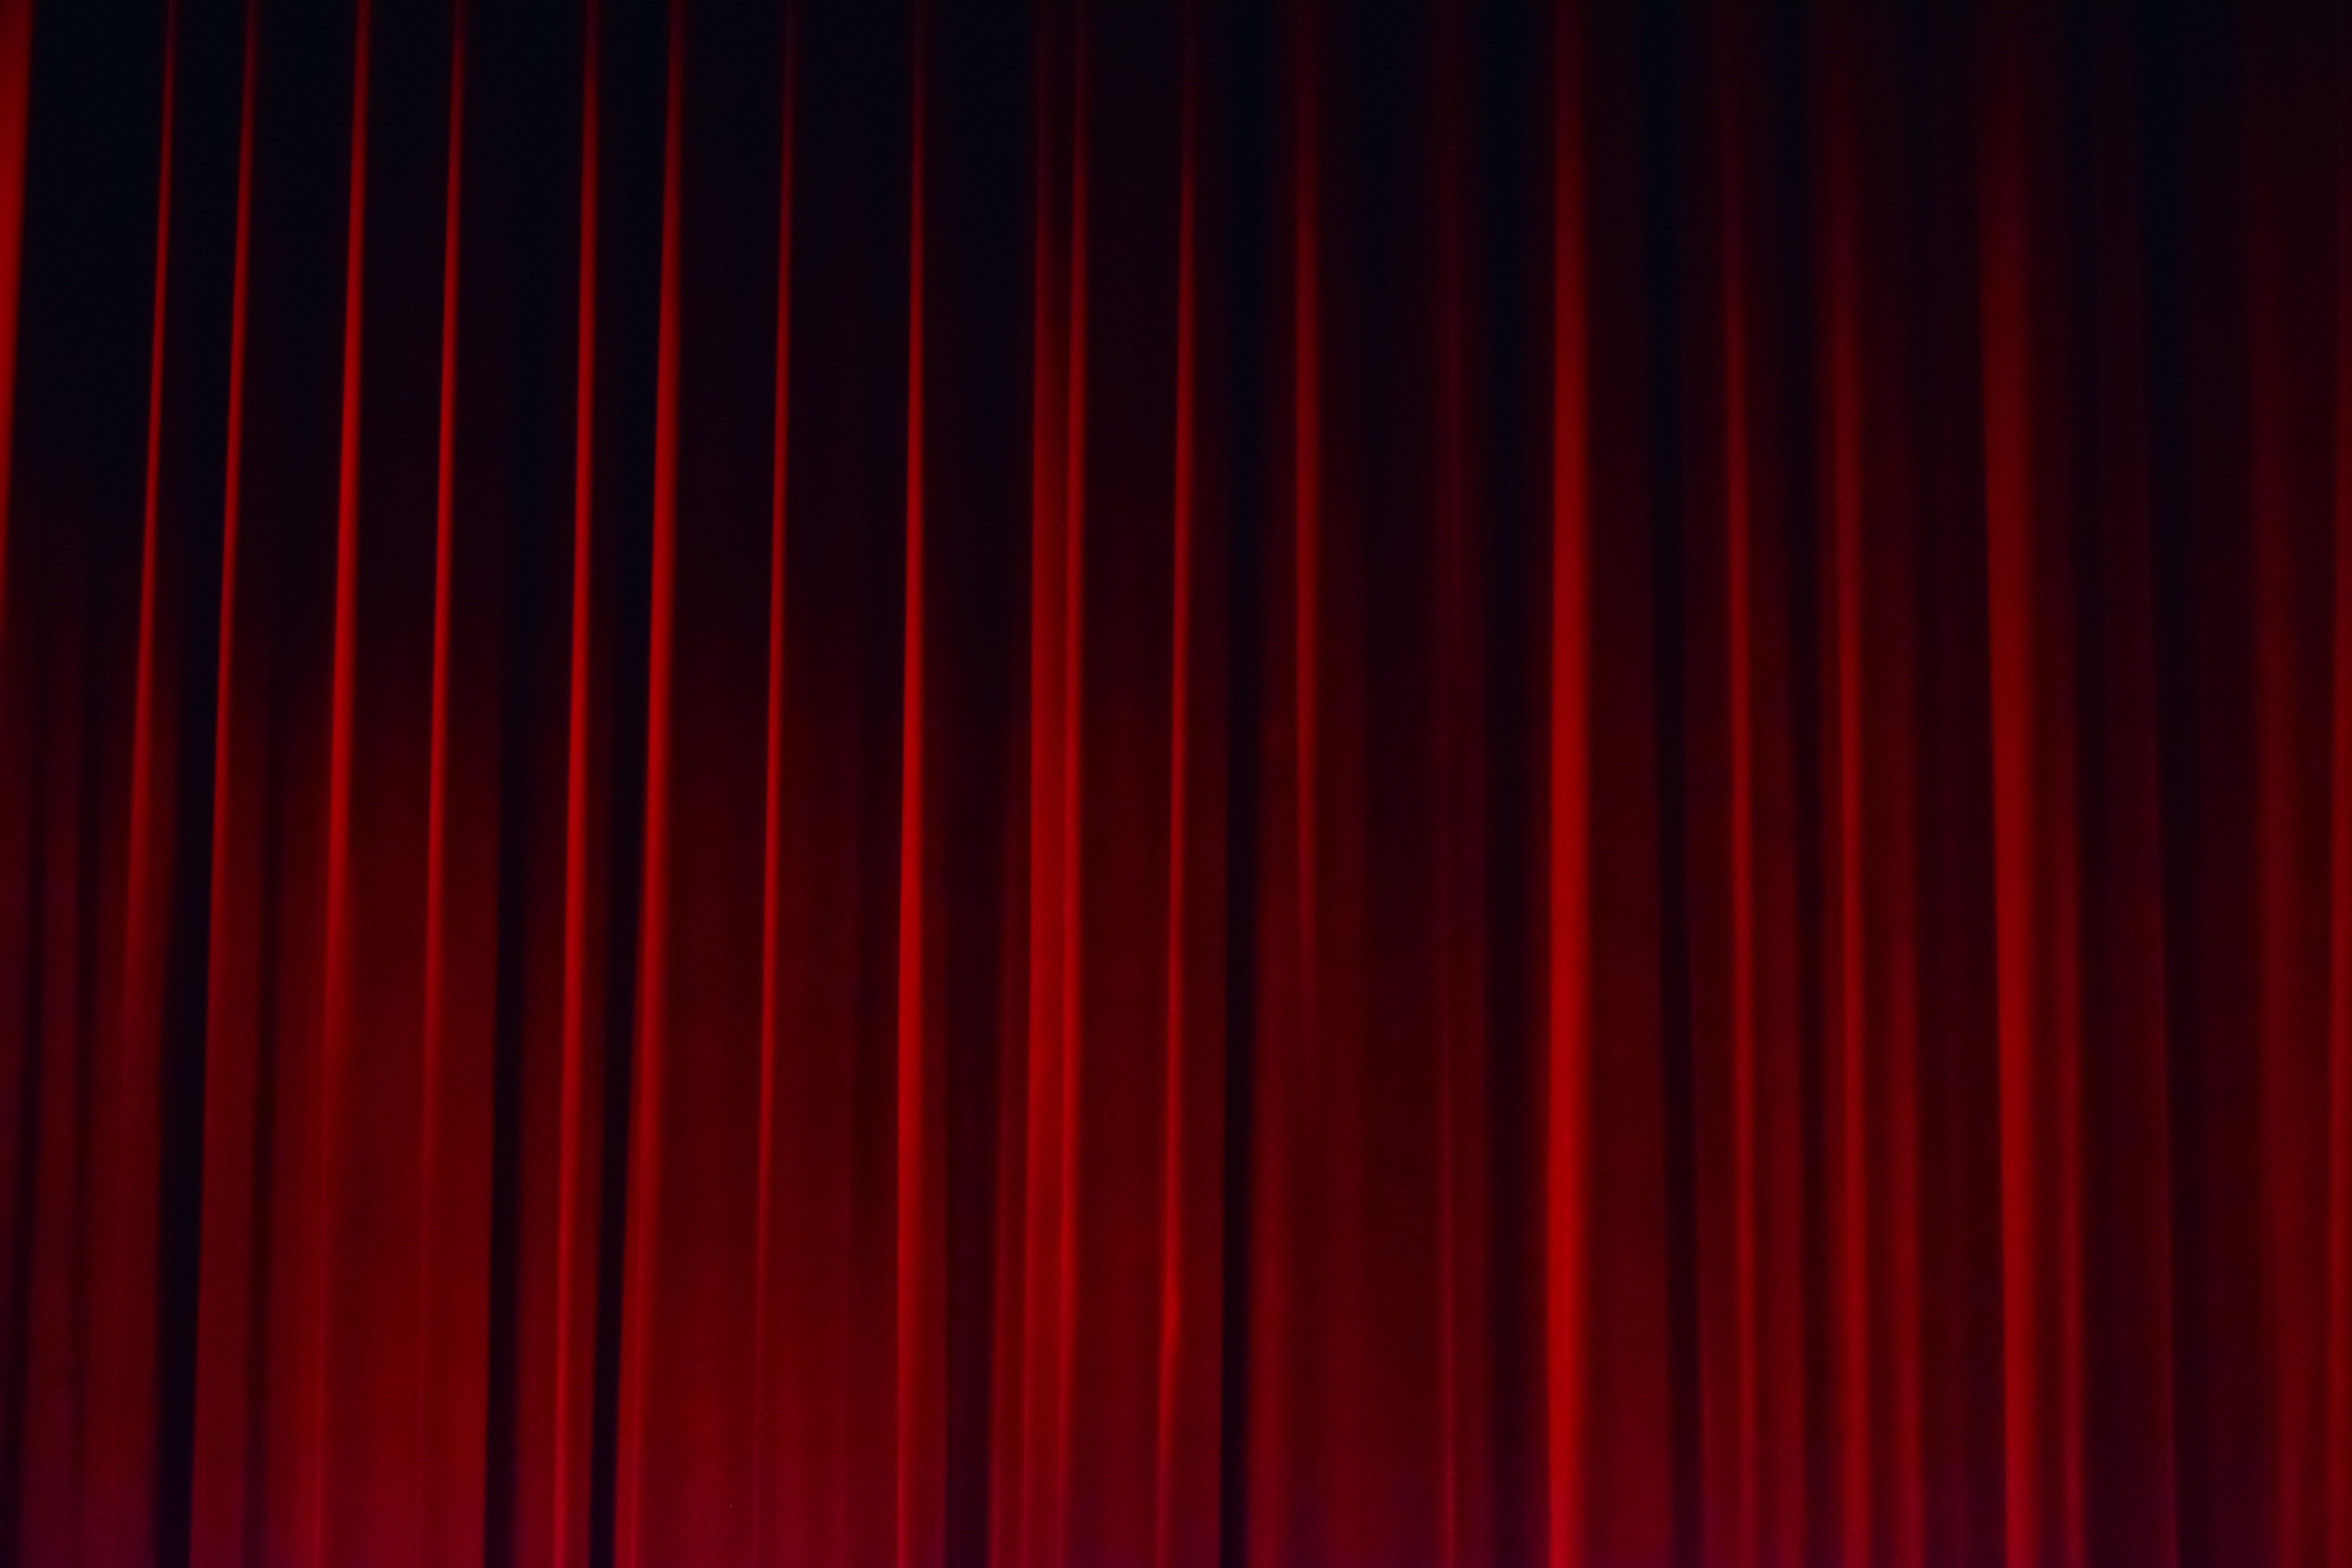 red curtain, red curtain digital wallpaper #theatre #curtain #theater red curtain #red K #wallpaper #hdwallpaper #des. Red curtains, Digital wallpaper, Curtains